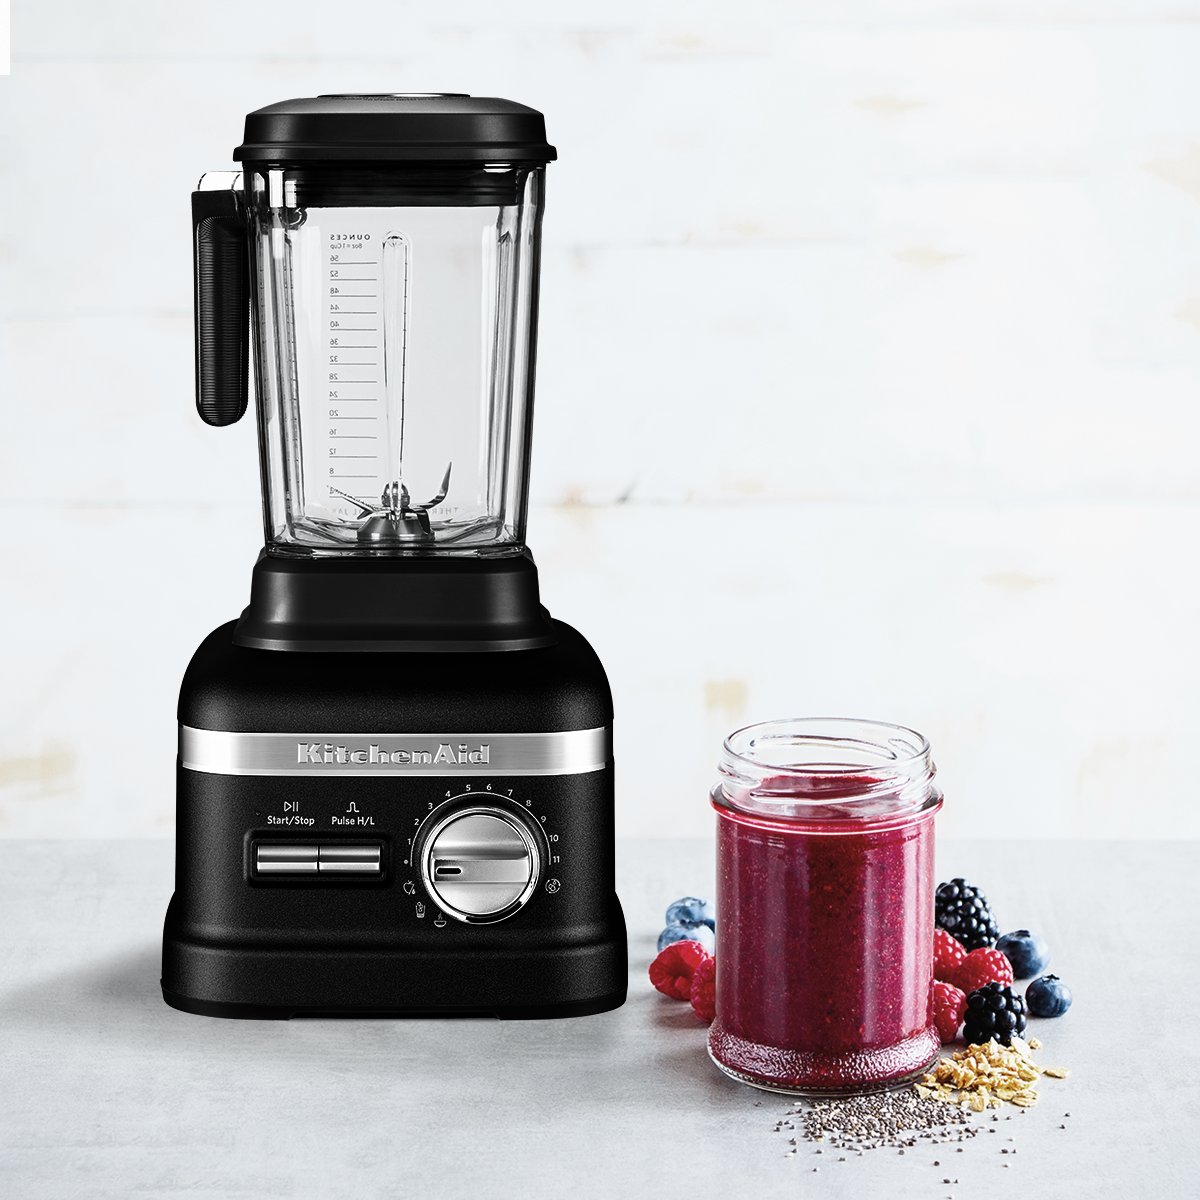 KitchenAid UK on Twitter: "Purple is the colour of ambition and power. That's definitely with sumptuous purple full of berry vitamins and plant Give yourself a boost today. https://t.co/FDqTbAKVdZ" /